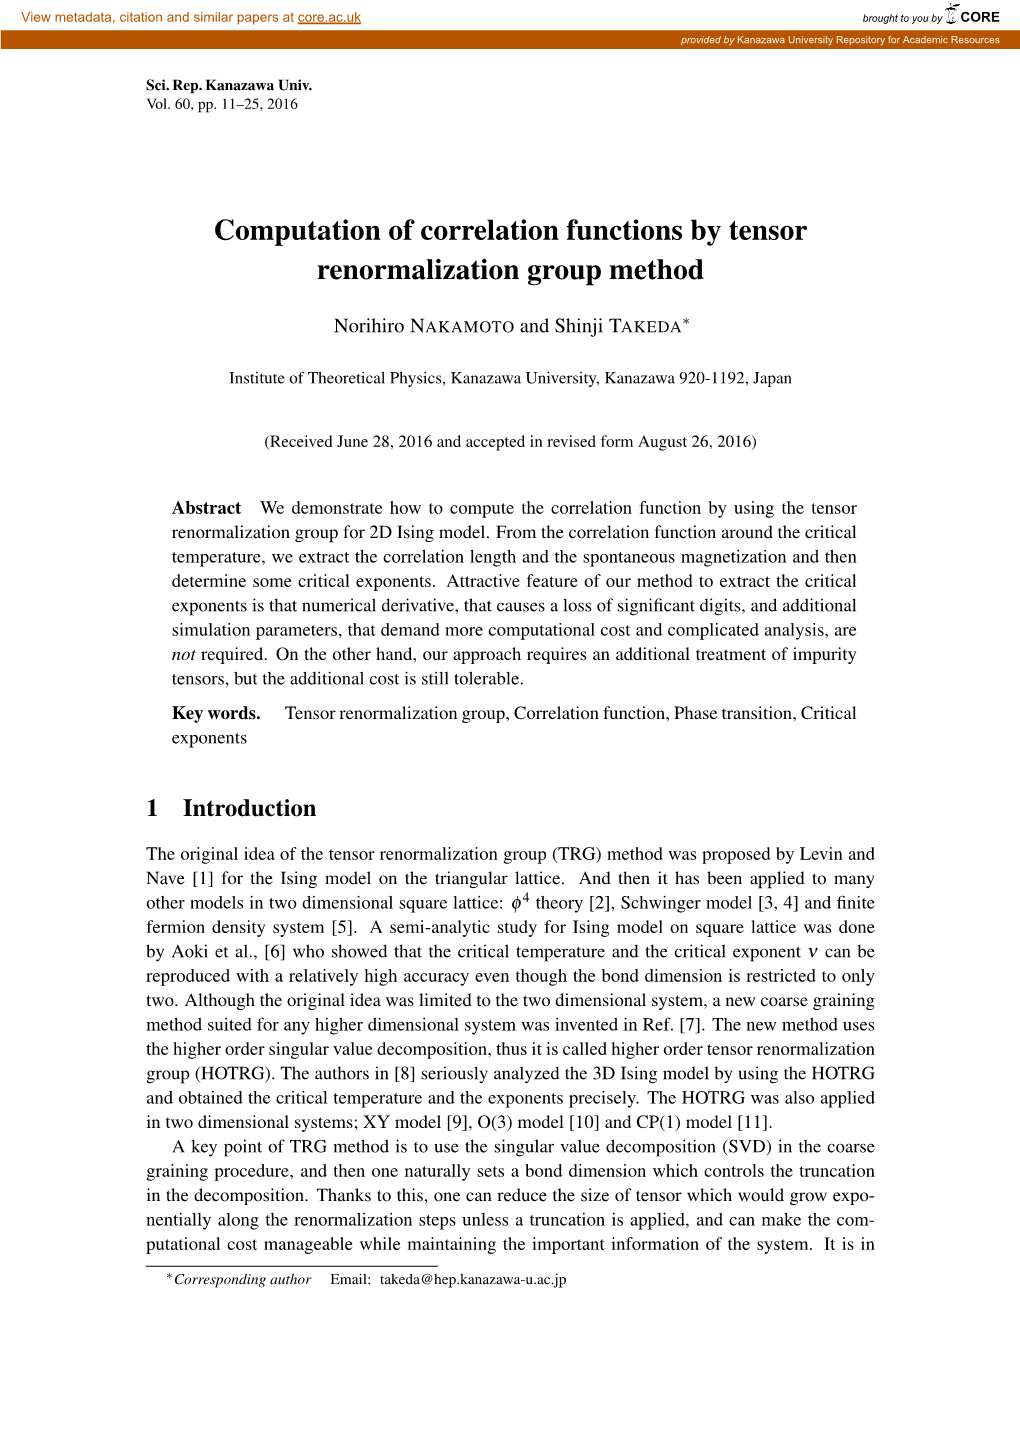 Computation of Correlation Functions by Tensor Renormalization Group Method